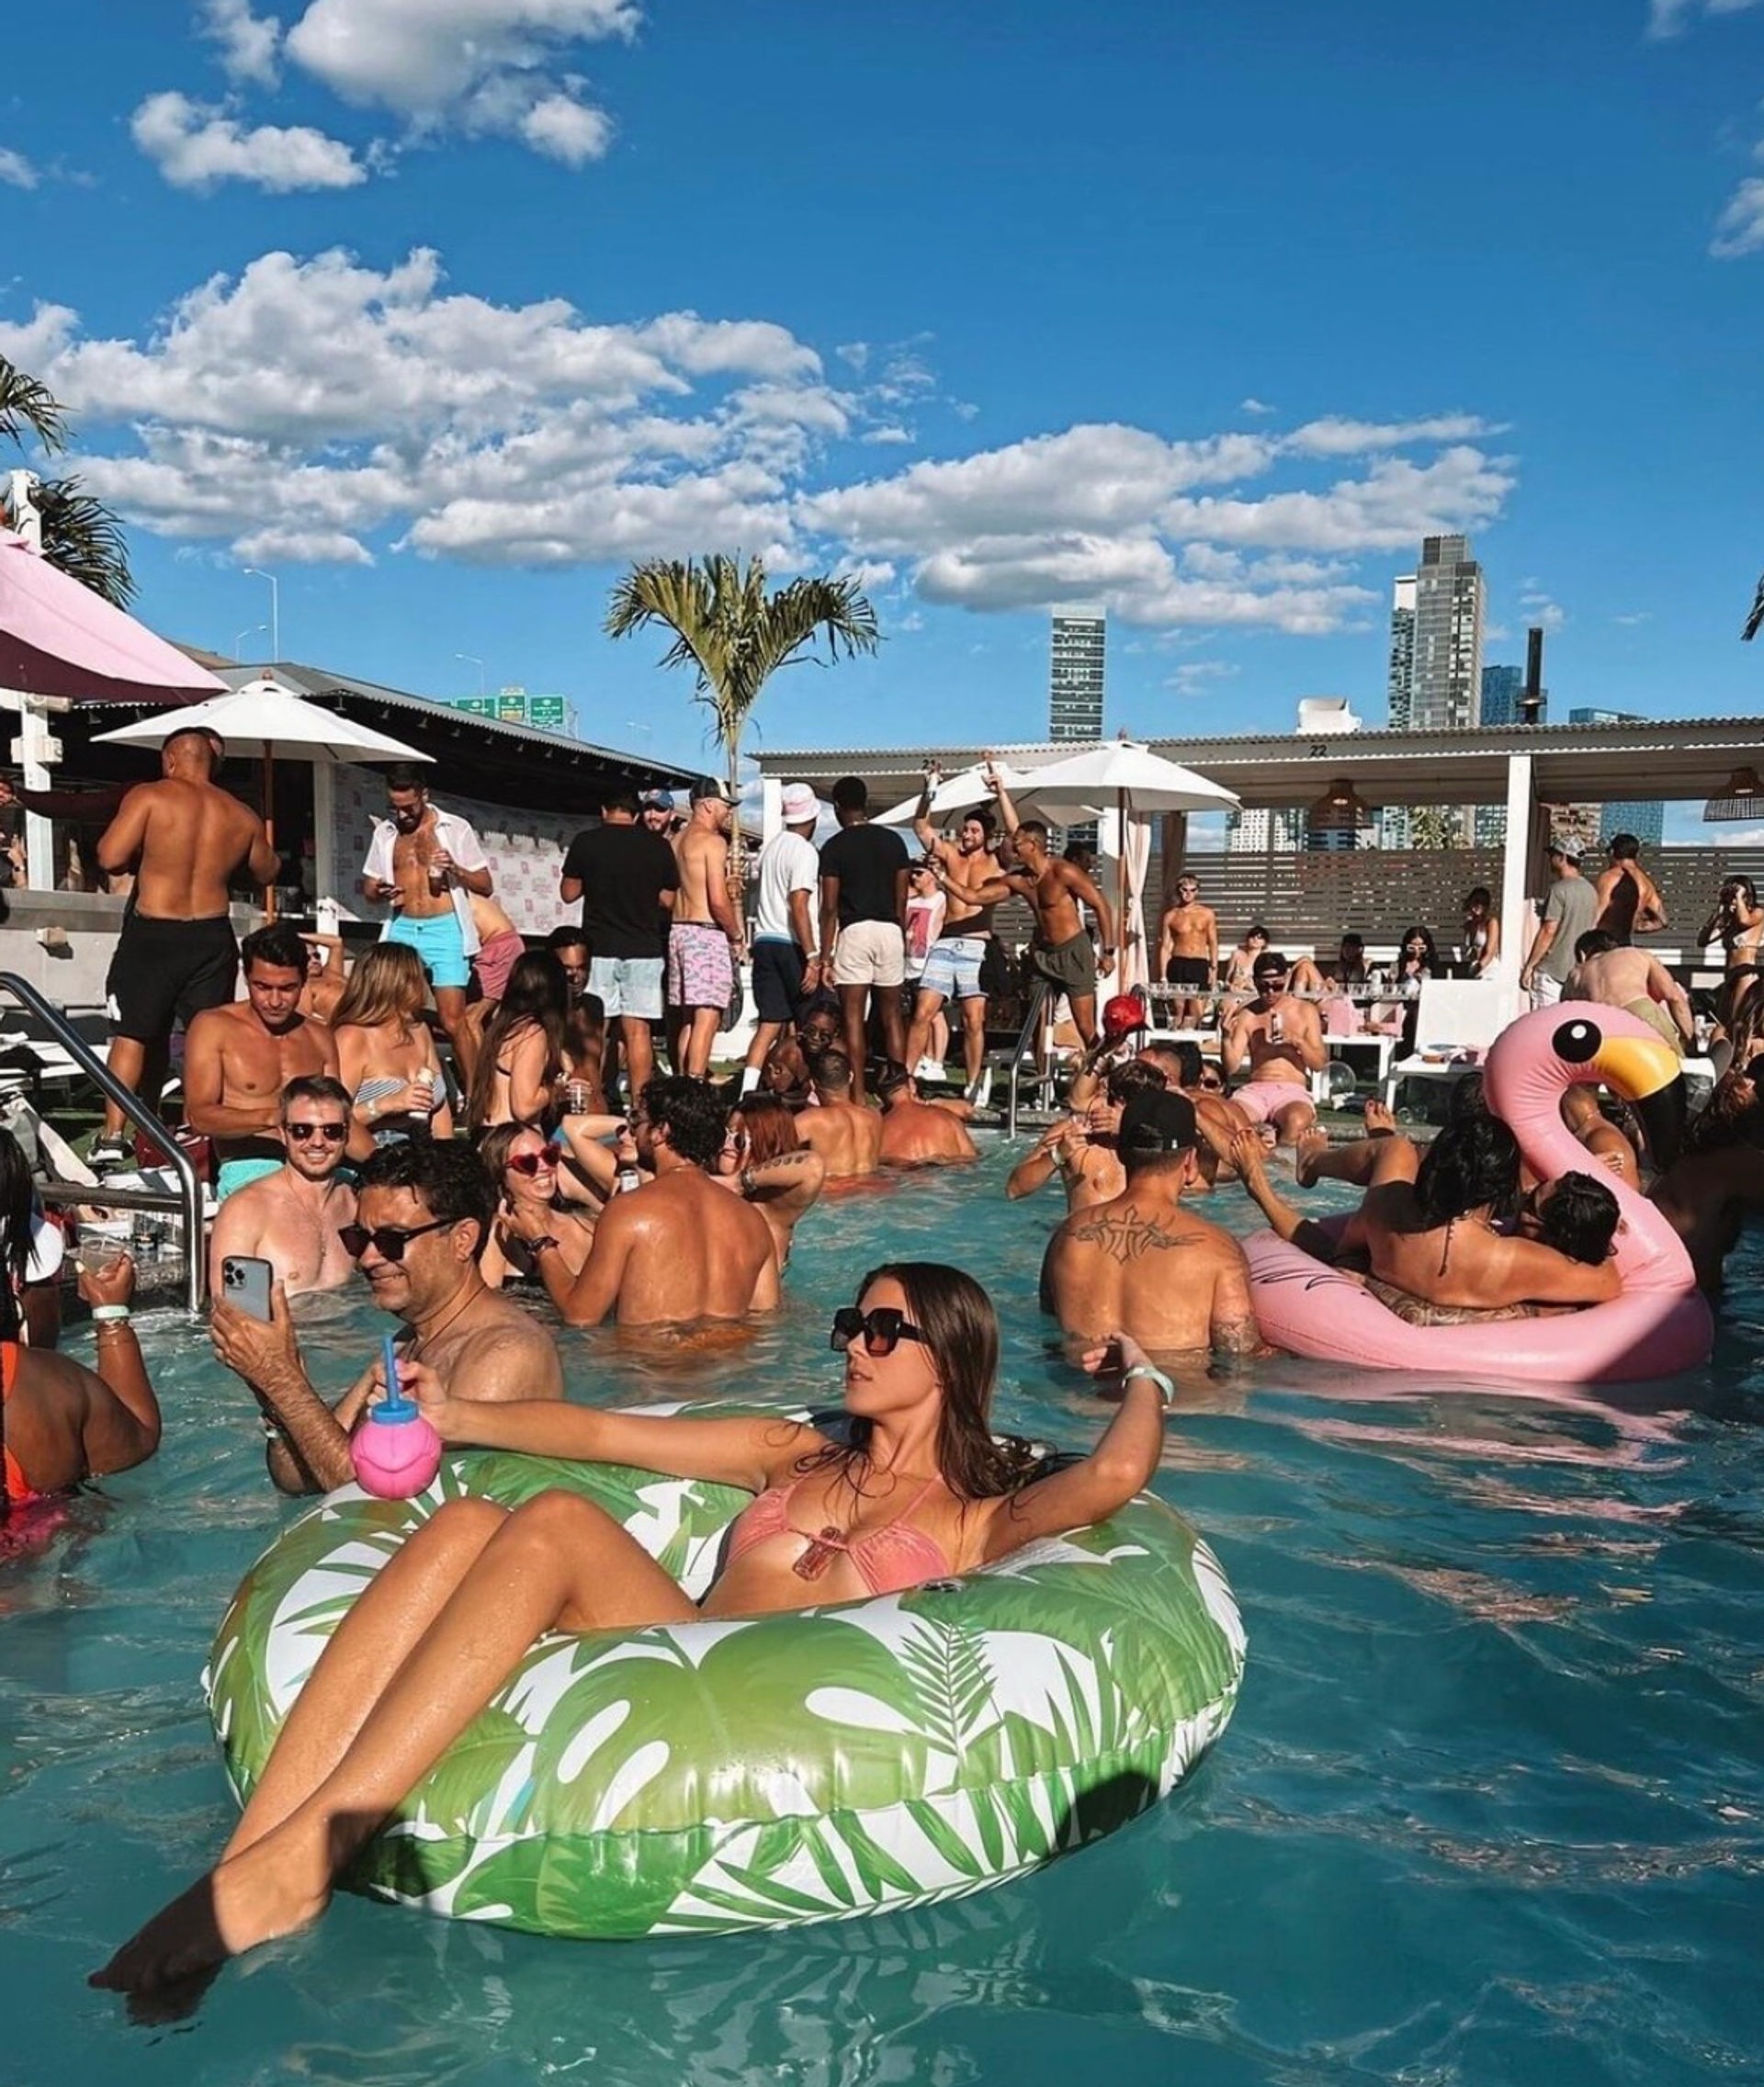 Rooftop Cabana Pool Party at The Summer Club — New York City's Hottest Pool Dayclub image 1